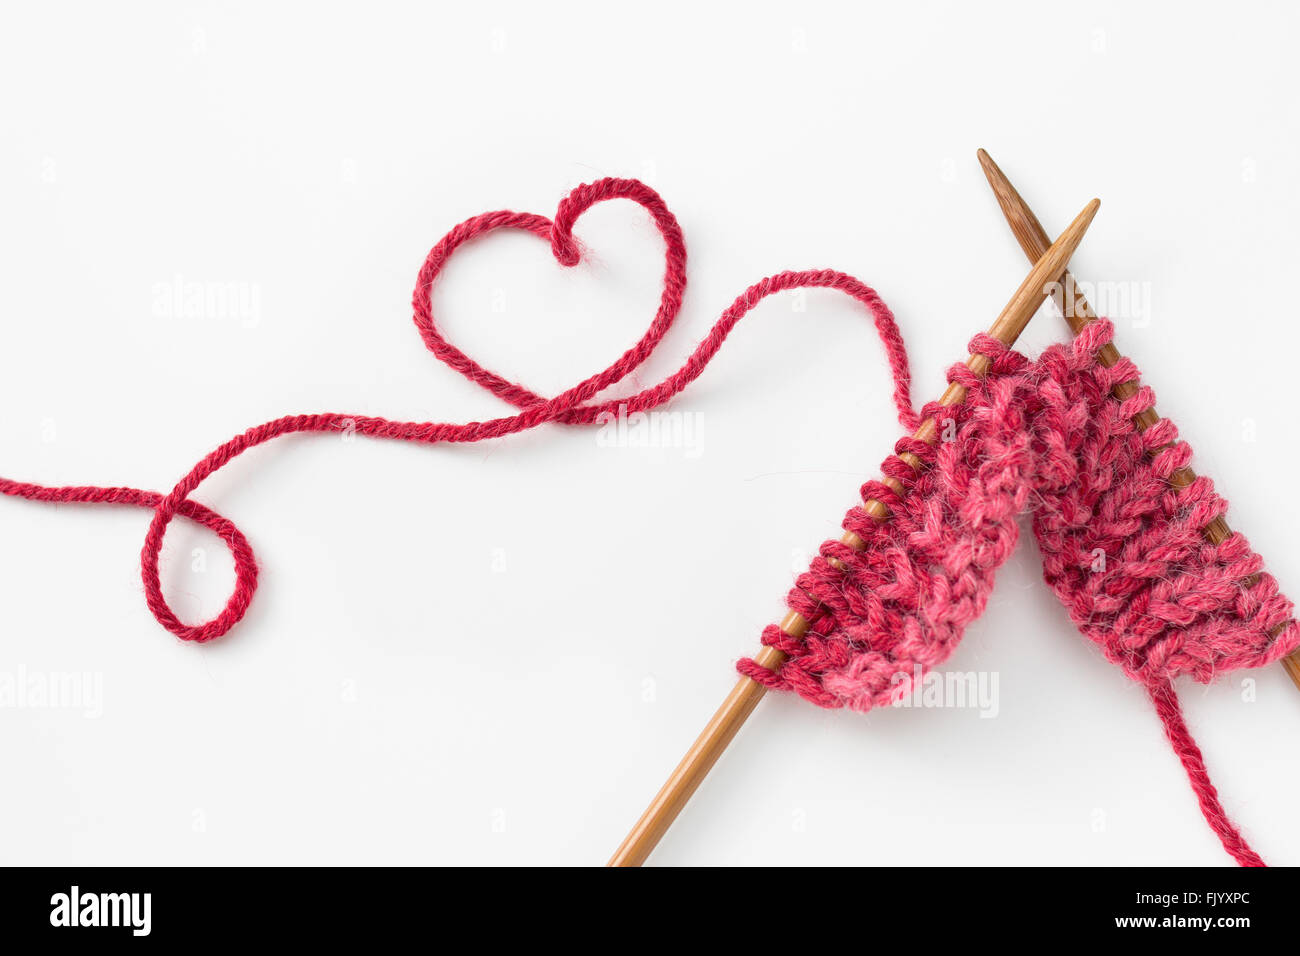 Incomplete knitting project with heart shaped woolen yarn Stock Photo